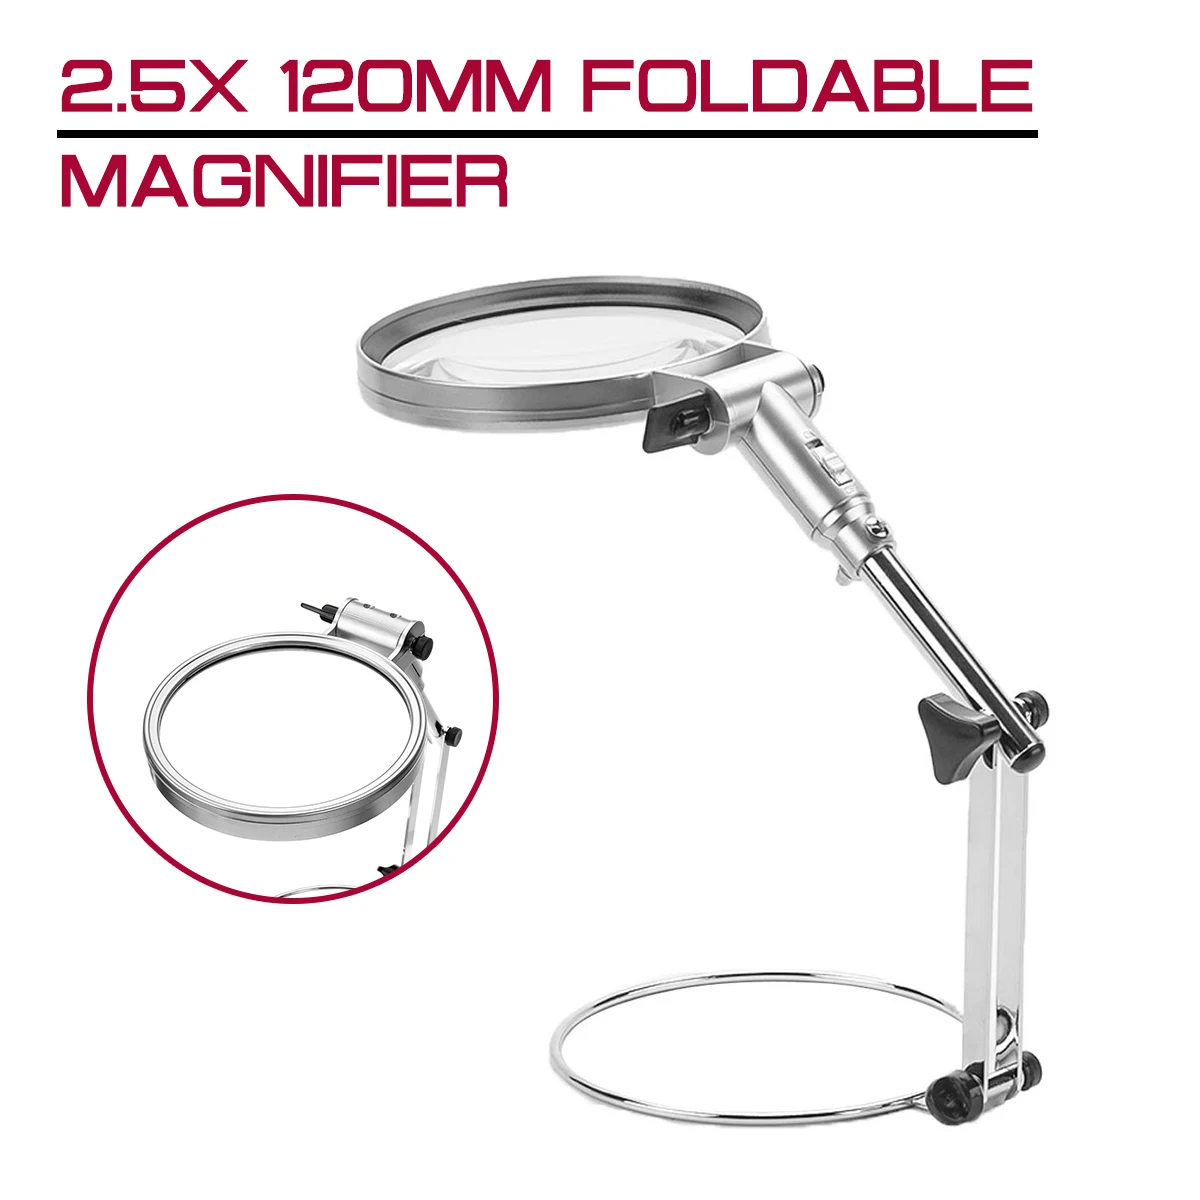 

2.5x 120mm Foldable Desktop Illuminated Magnifier Magnifying Glass LED Lighted Lamp Optical Glass Lens Magnifier Reading Loupe